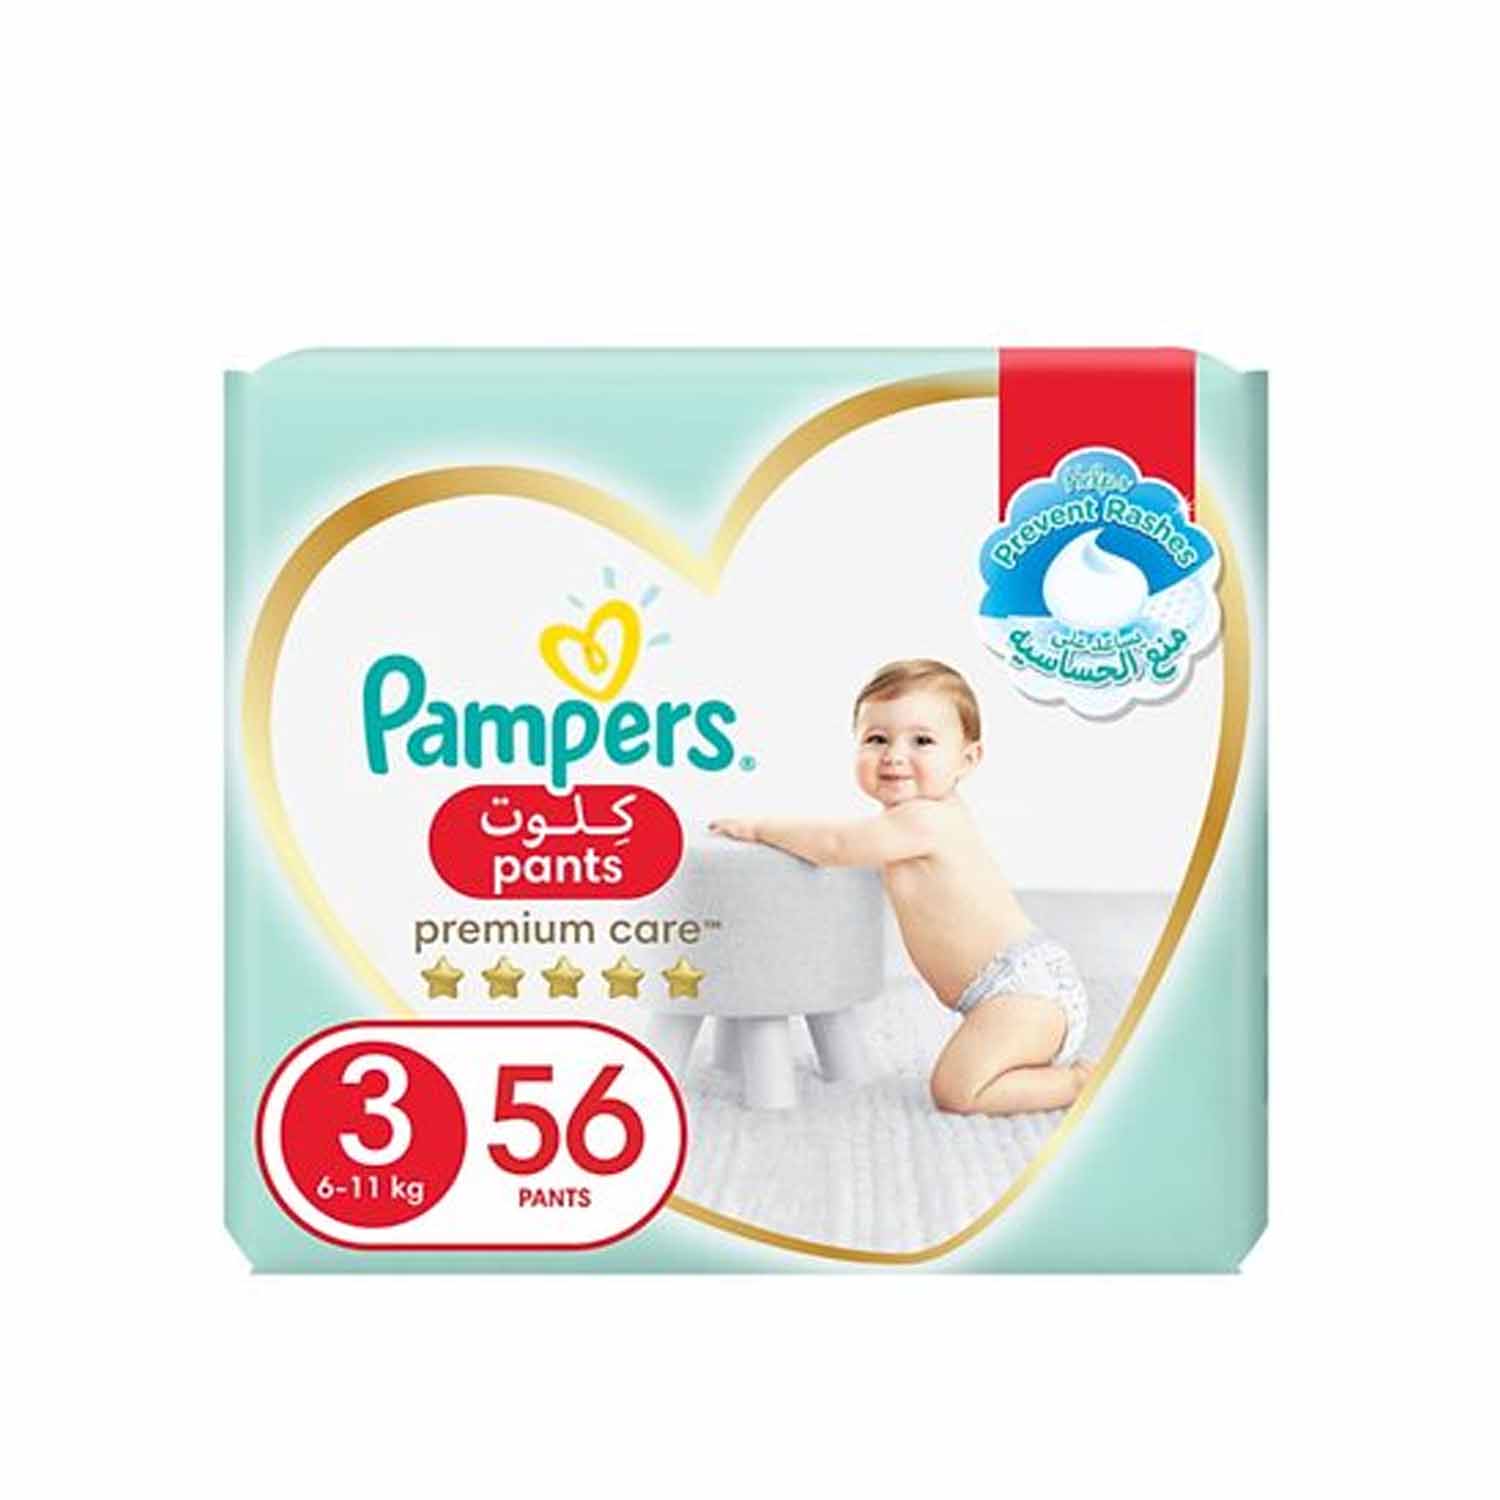 Pampers Baby-Dry Nappy Pants Diaper Size 3 6-11 kg 46 pcs Online